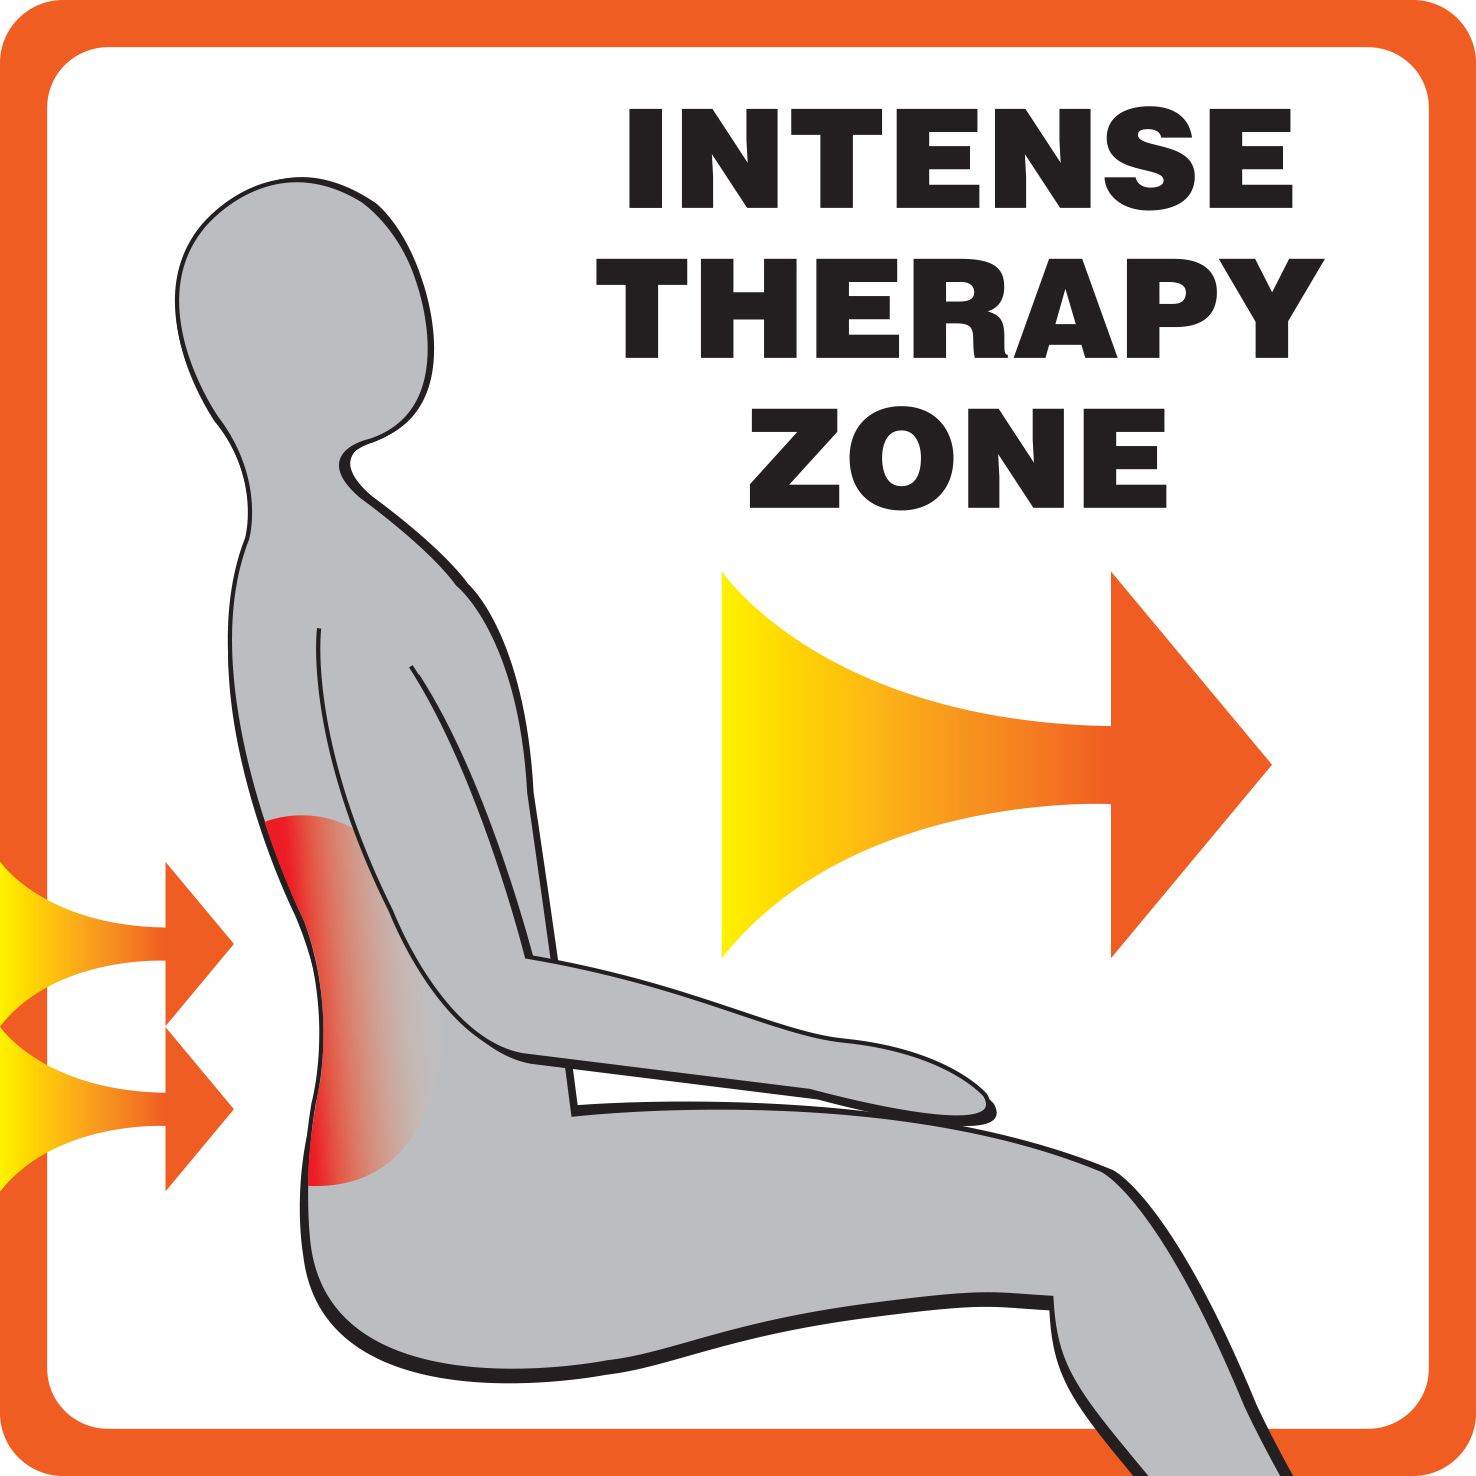 Intense-therapy-zone